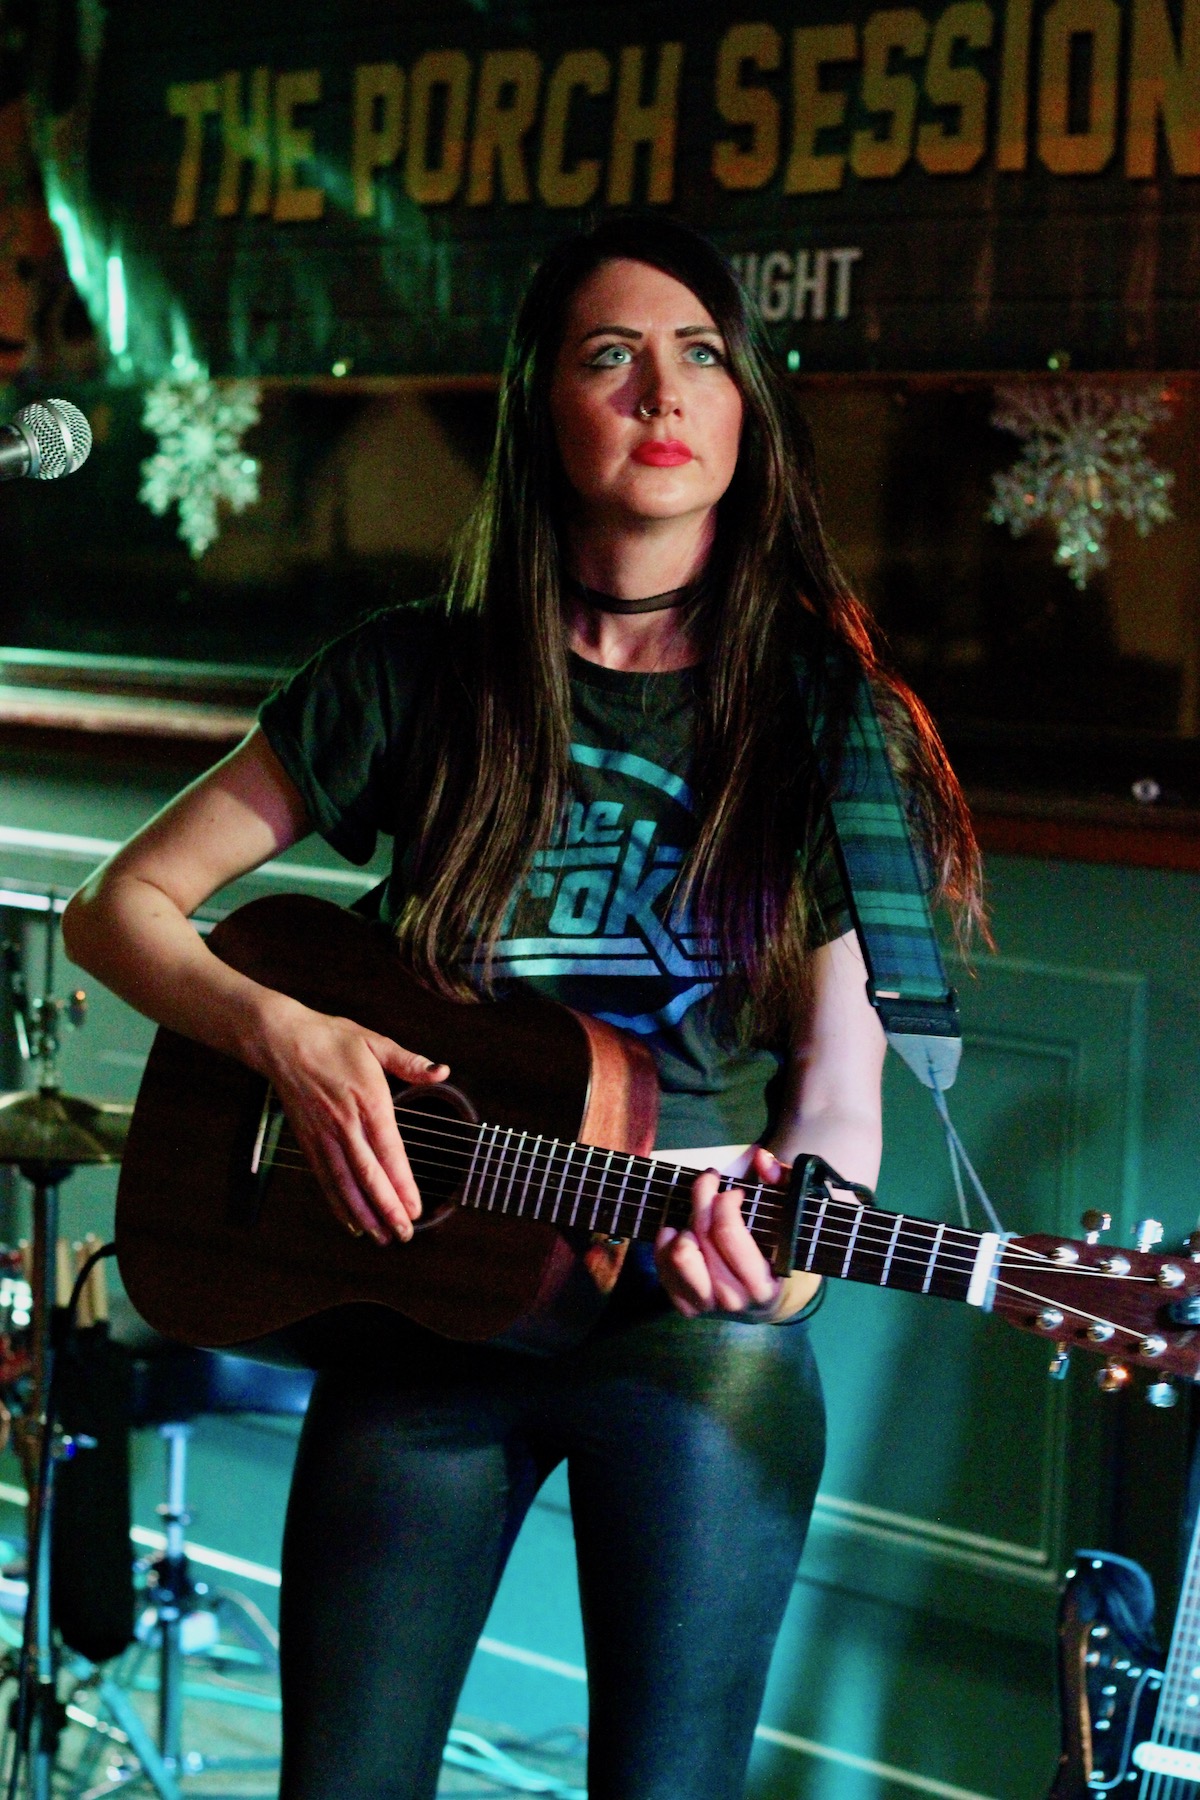 Lauren MacKenzie at The Porch Sessions Inverness December 20183001 - The Porch Sessions, 8/12/2018 - Images